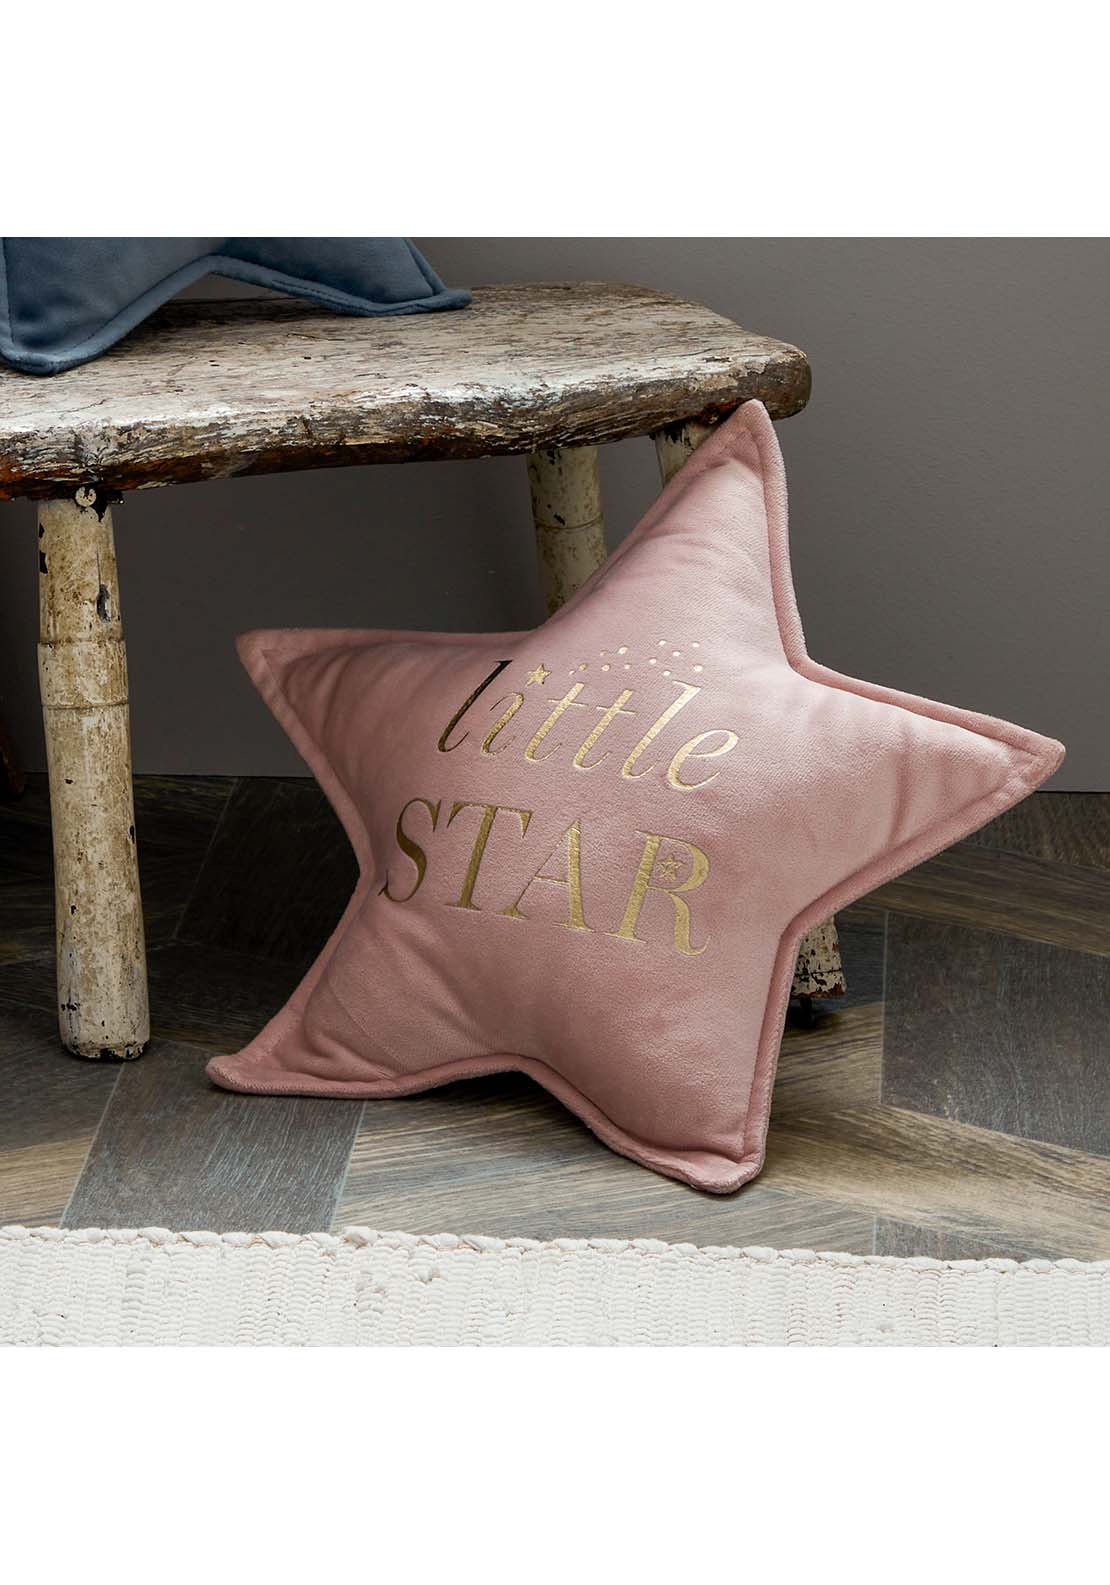 The Home Collection Little Star Velvet Cushion 30cm 2 Shaws Department Stores